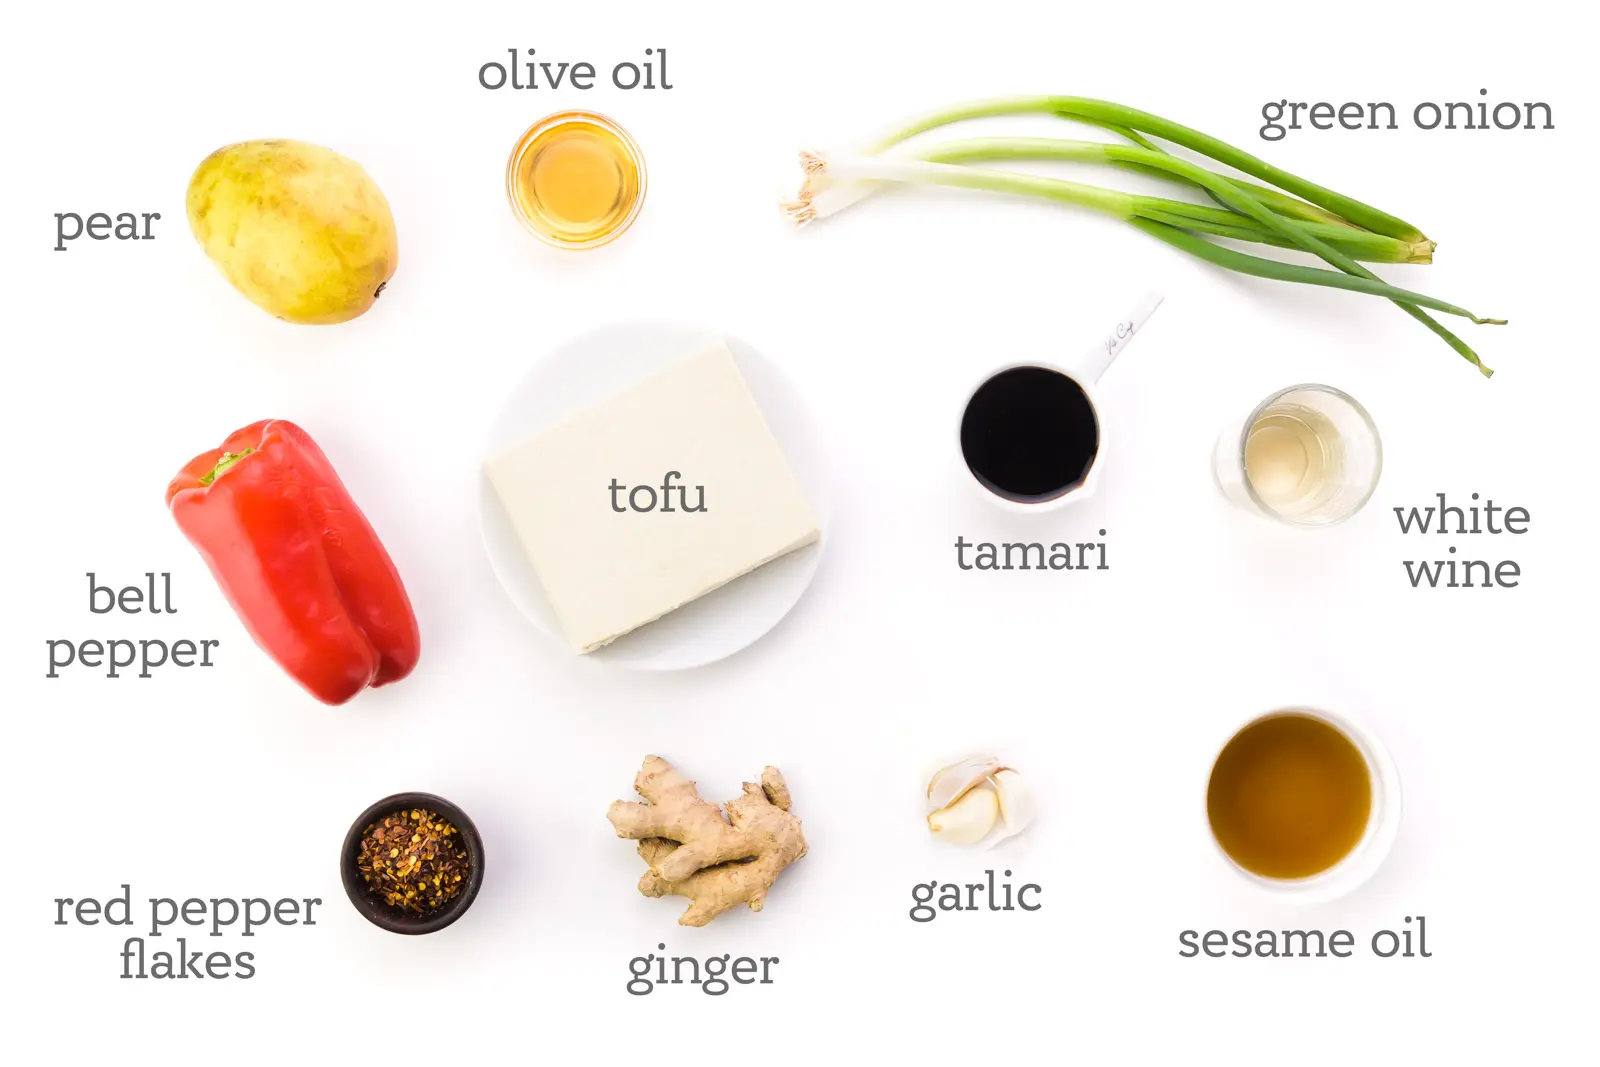 Ingredients are on a white counter. The labels next to them reads, "green onions, white wine, Tamari, sesame oil, garlic, ginger, red pepper flakes, bell pepper, tofu, pear, and olive oil."